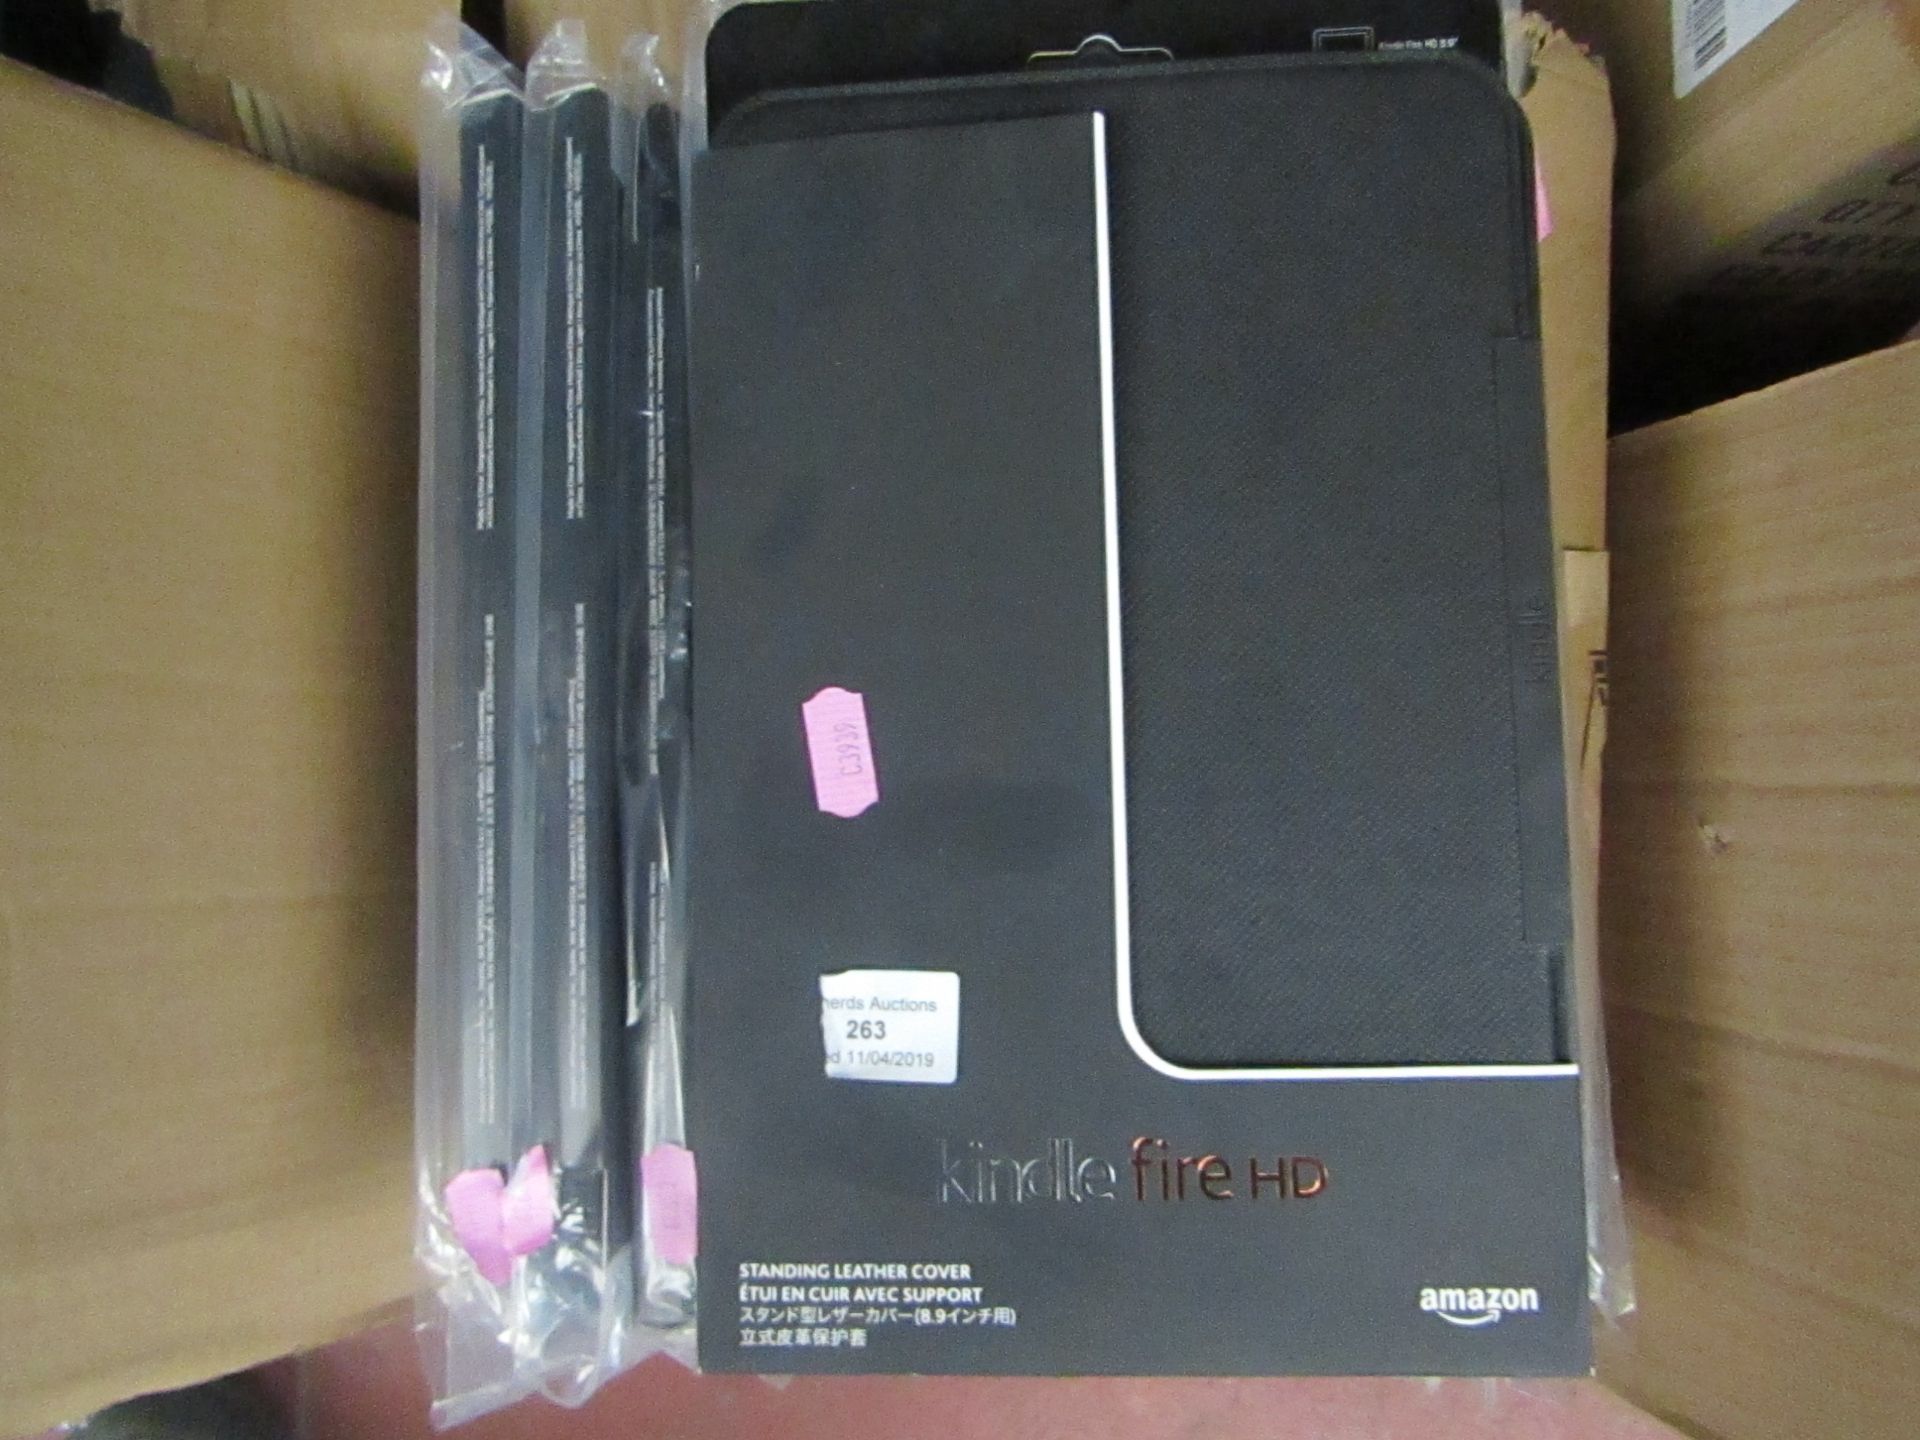 10 x Kindle Fire HD Standing Leather Covers 8.9" new with packaging